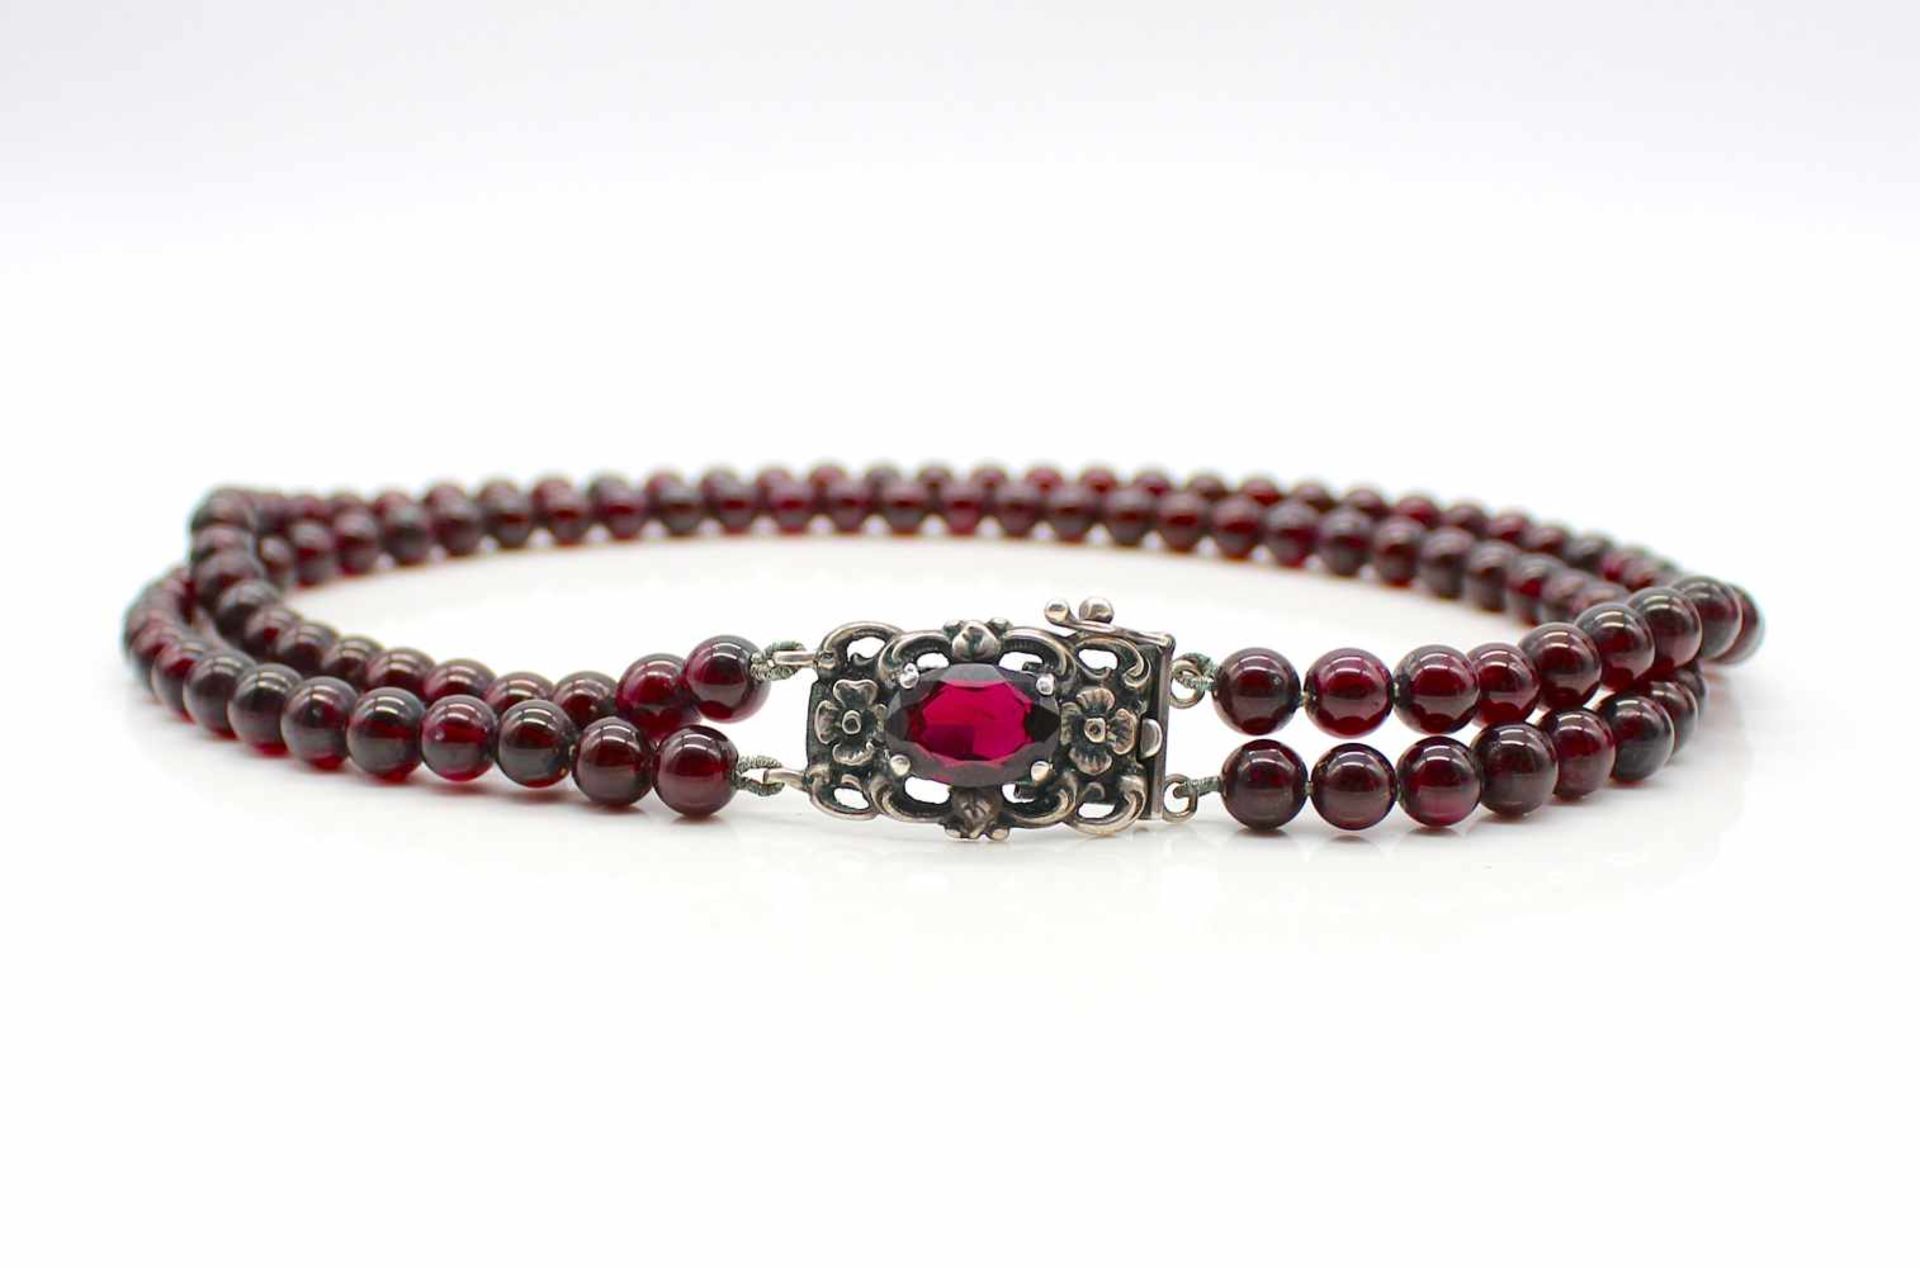 Chain with 2 rows of garnet balls and a lock tested for silver.weight 82,9 g, length approx. 40